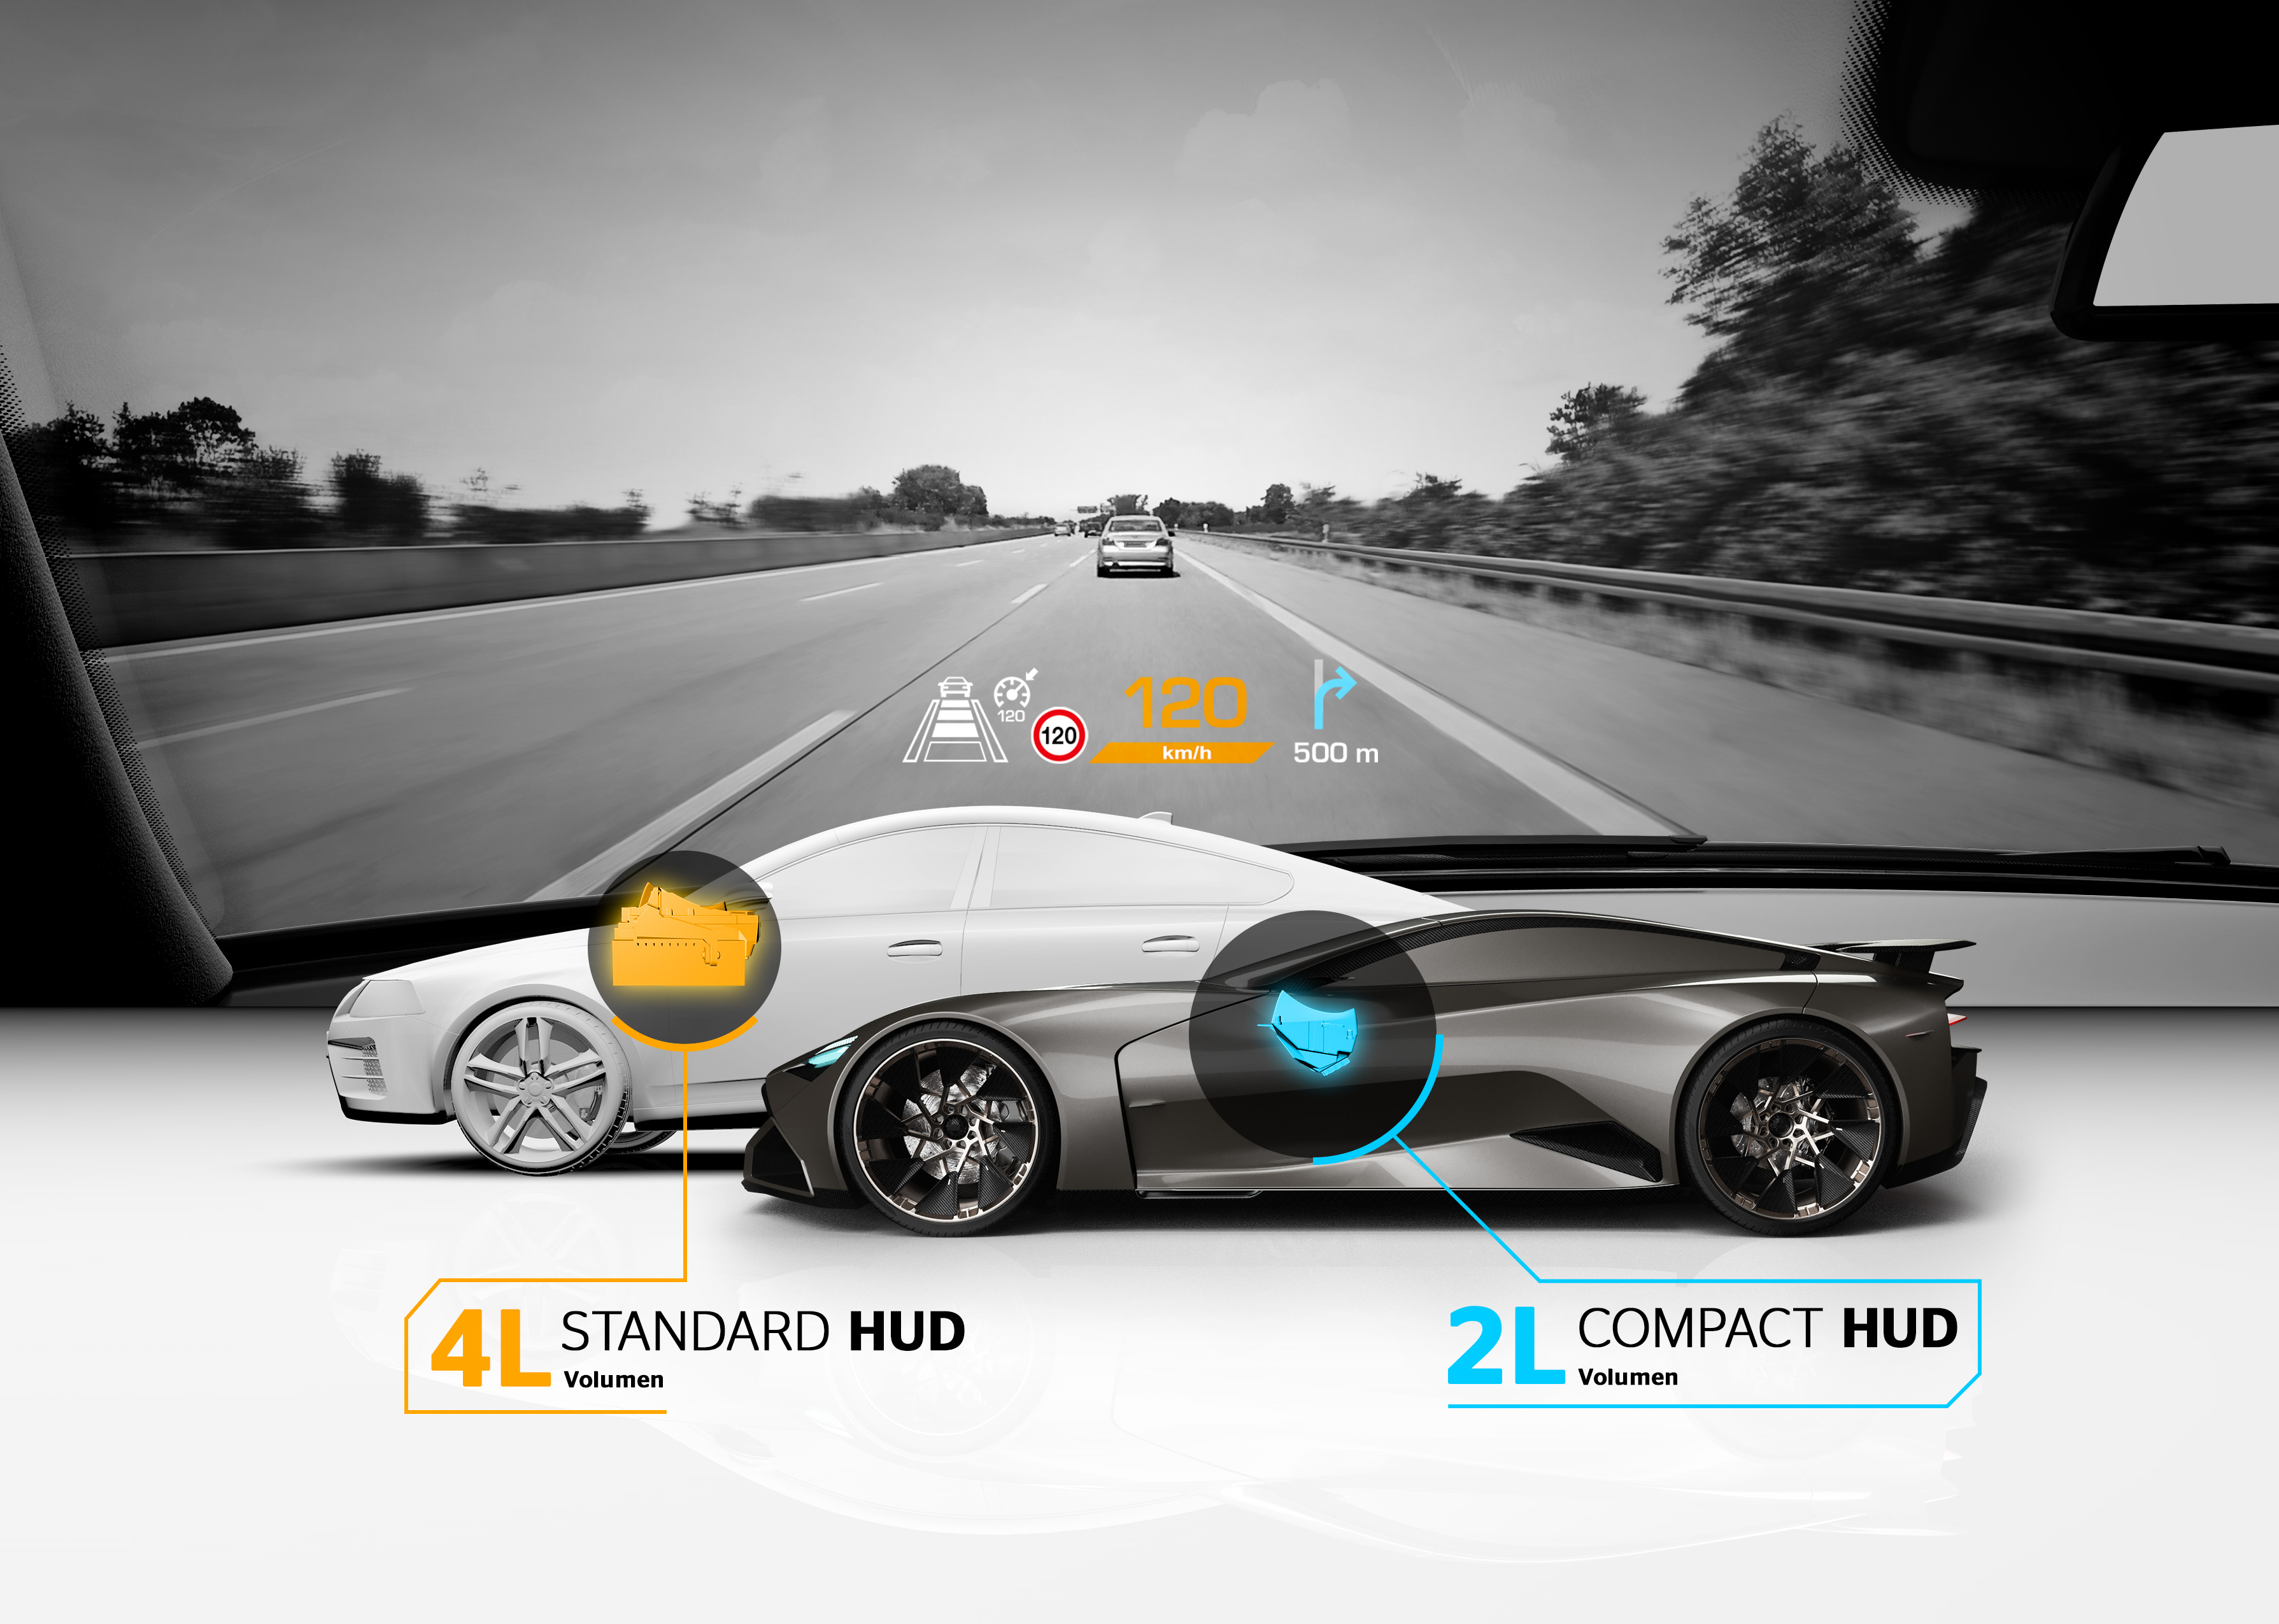 Continental Engineering Services Is Developing a Special Head-Up Display  for Sports Cars - Continental AG